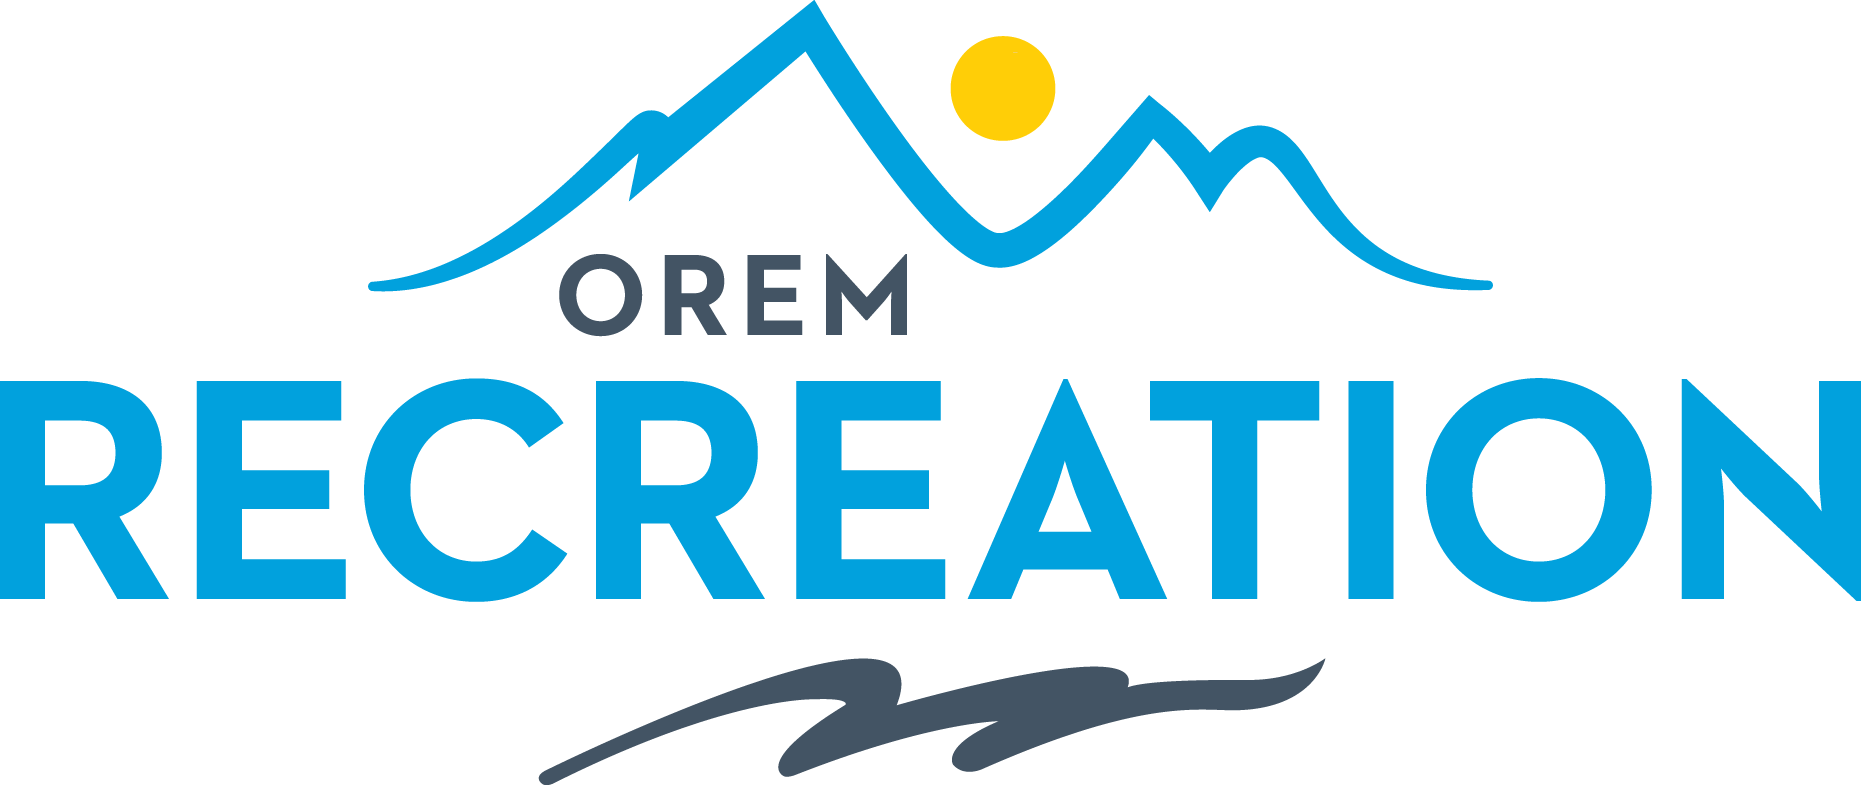 Recreation Logo - Orem Recreation – Your Place to Play